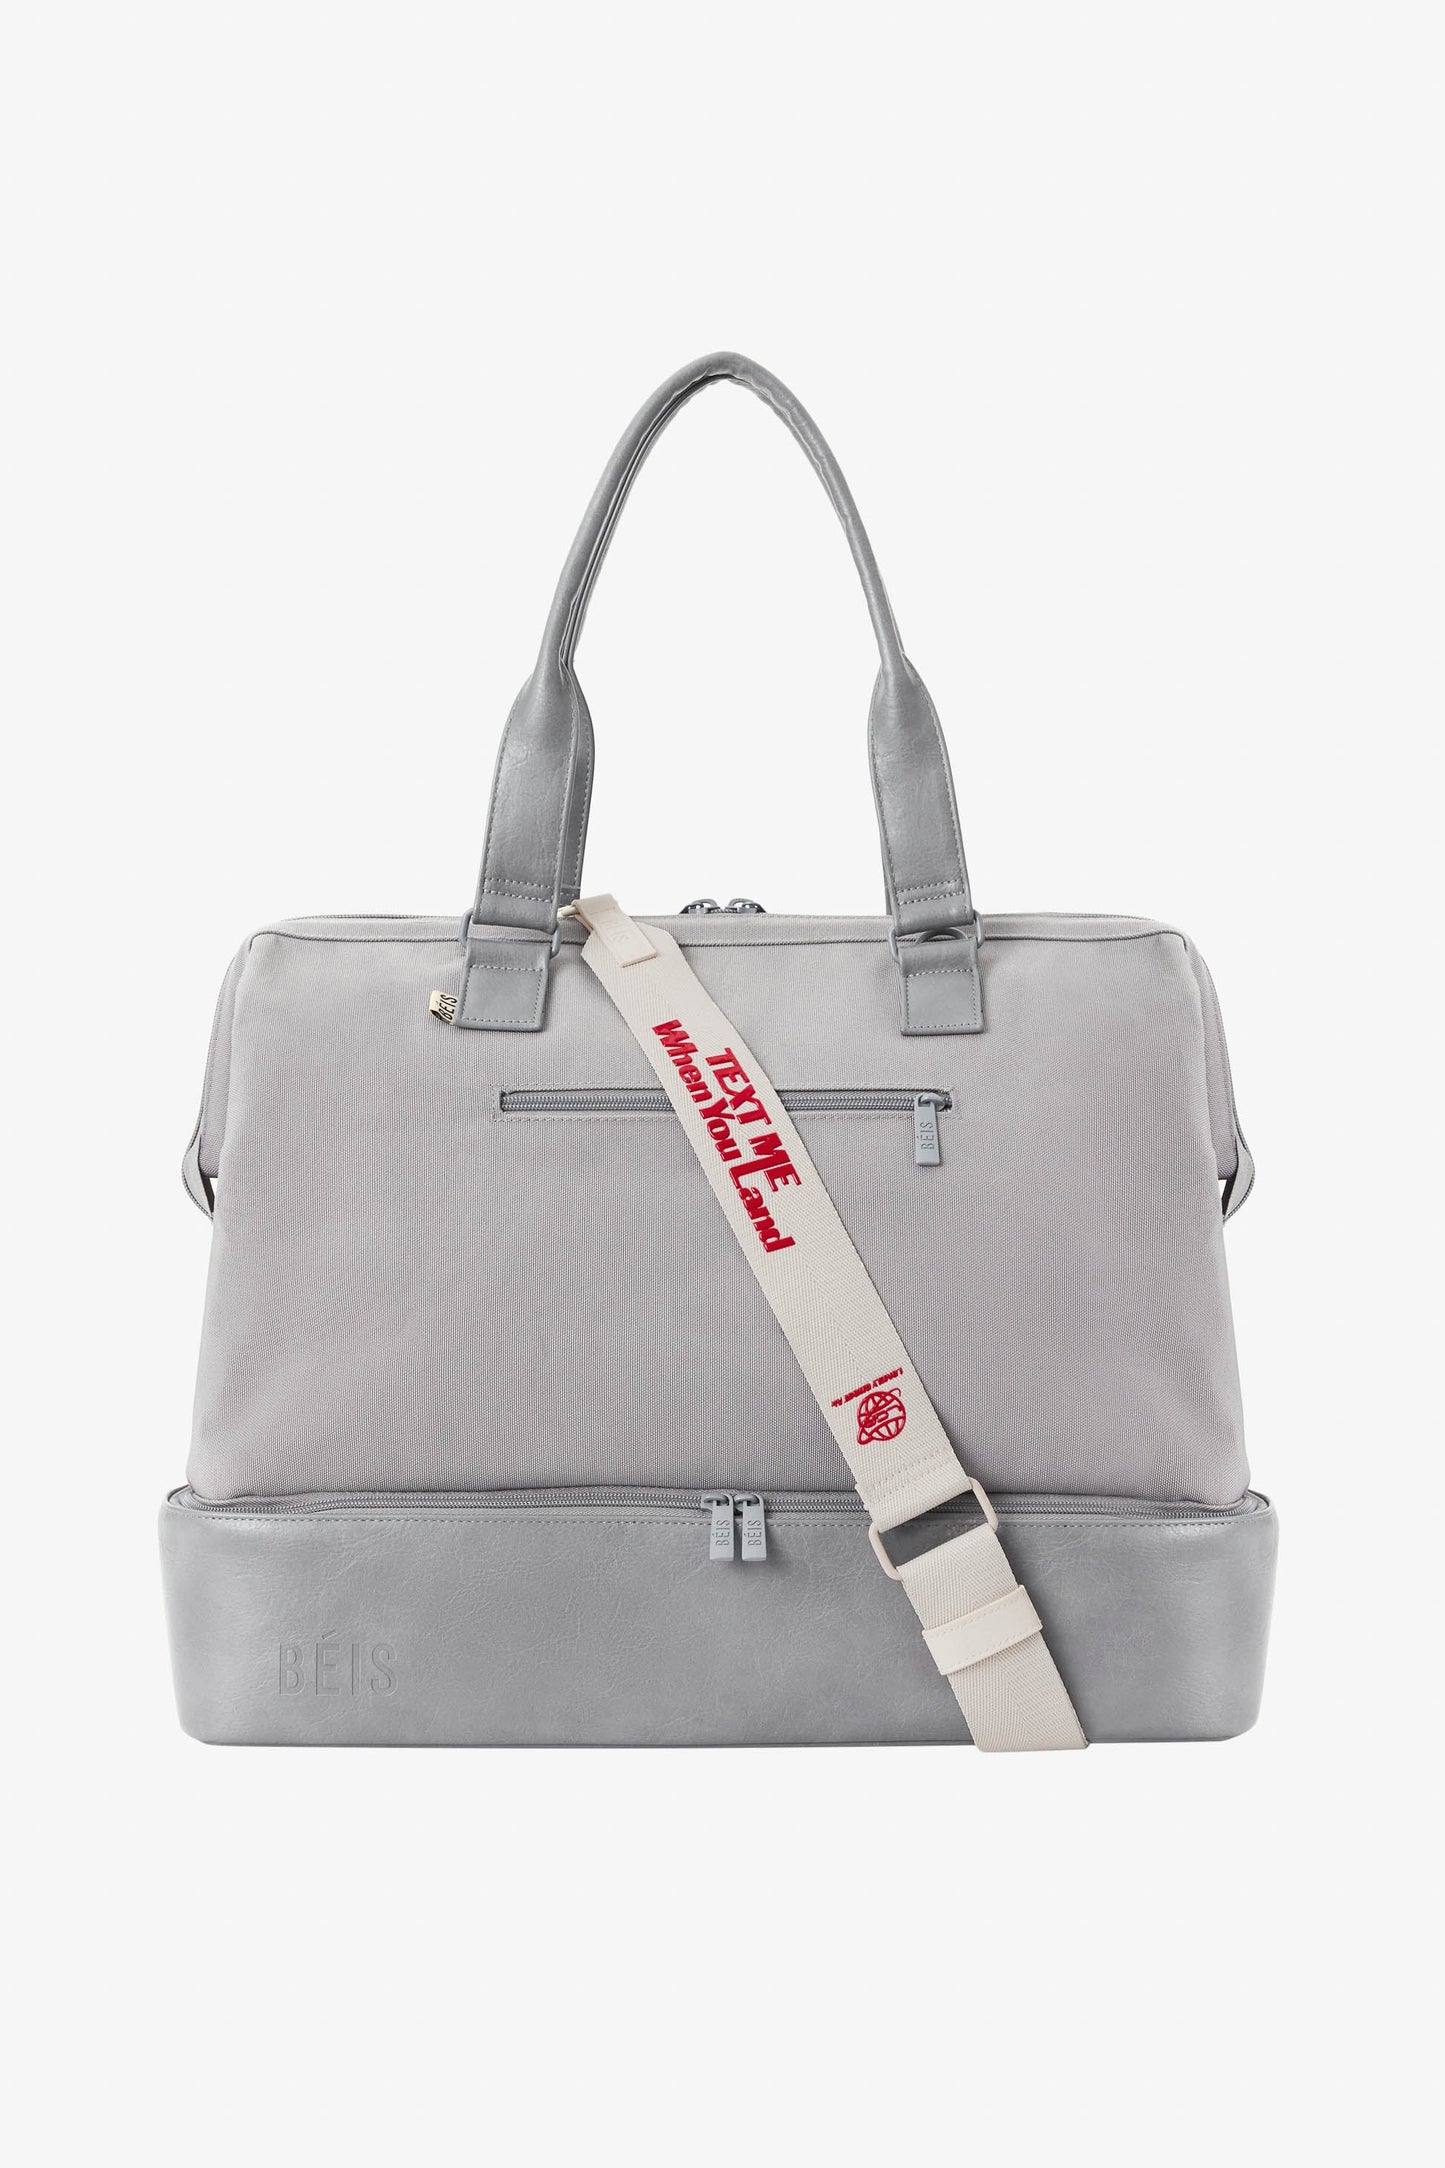 The Shoulder Strap in Ghost White